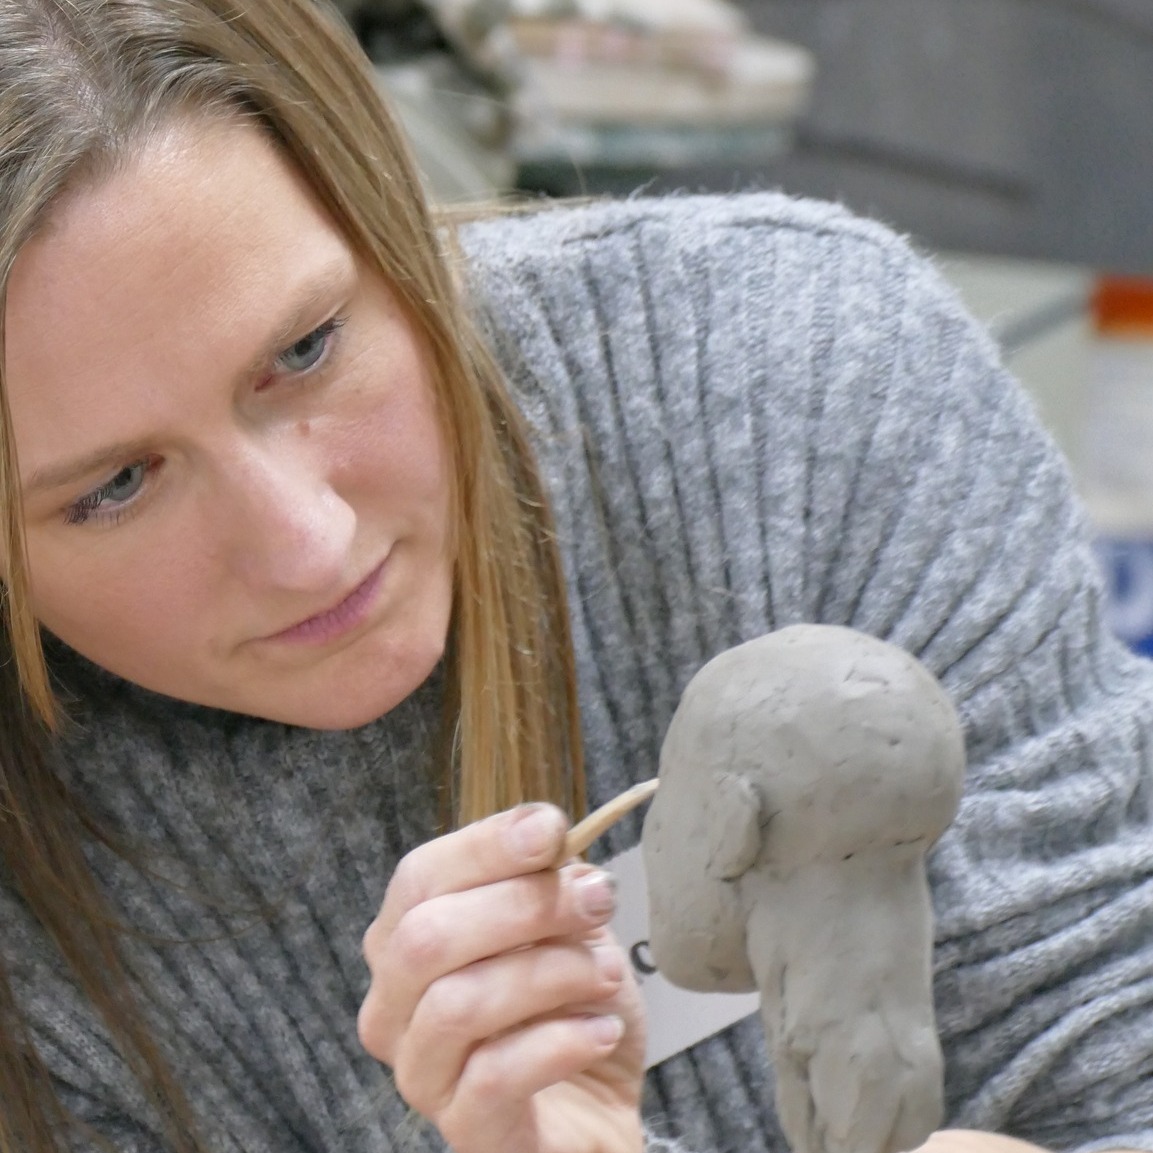 woman concentrating on small clay sculpture of a human head